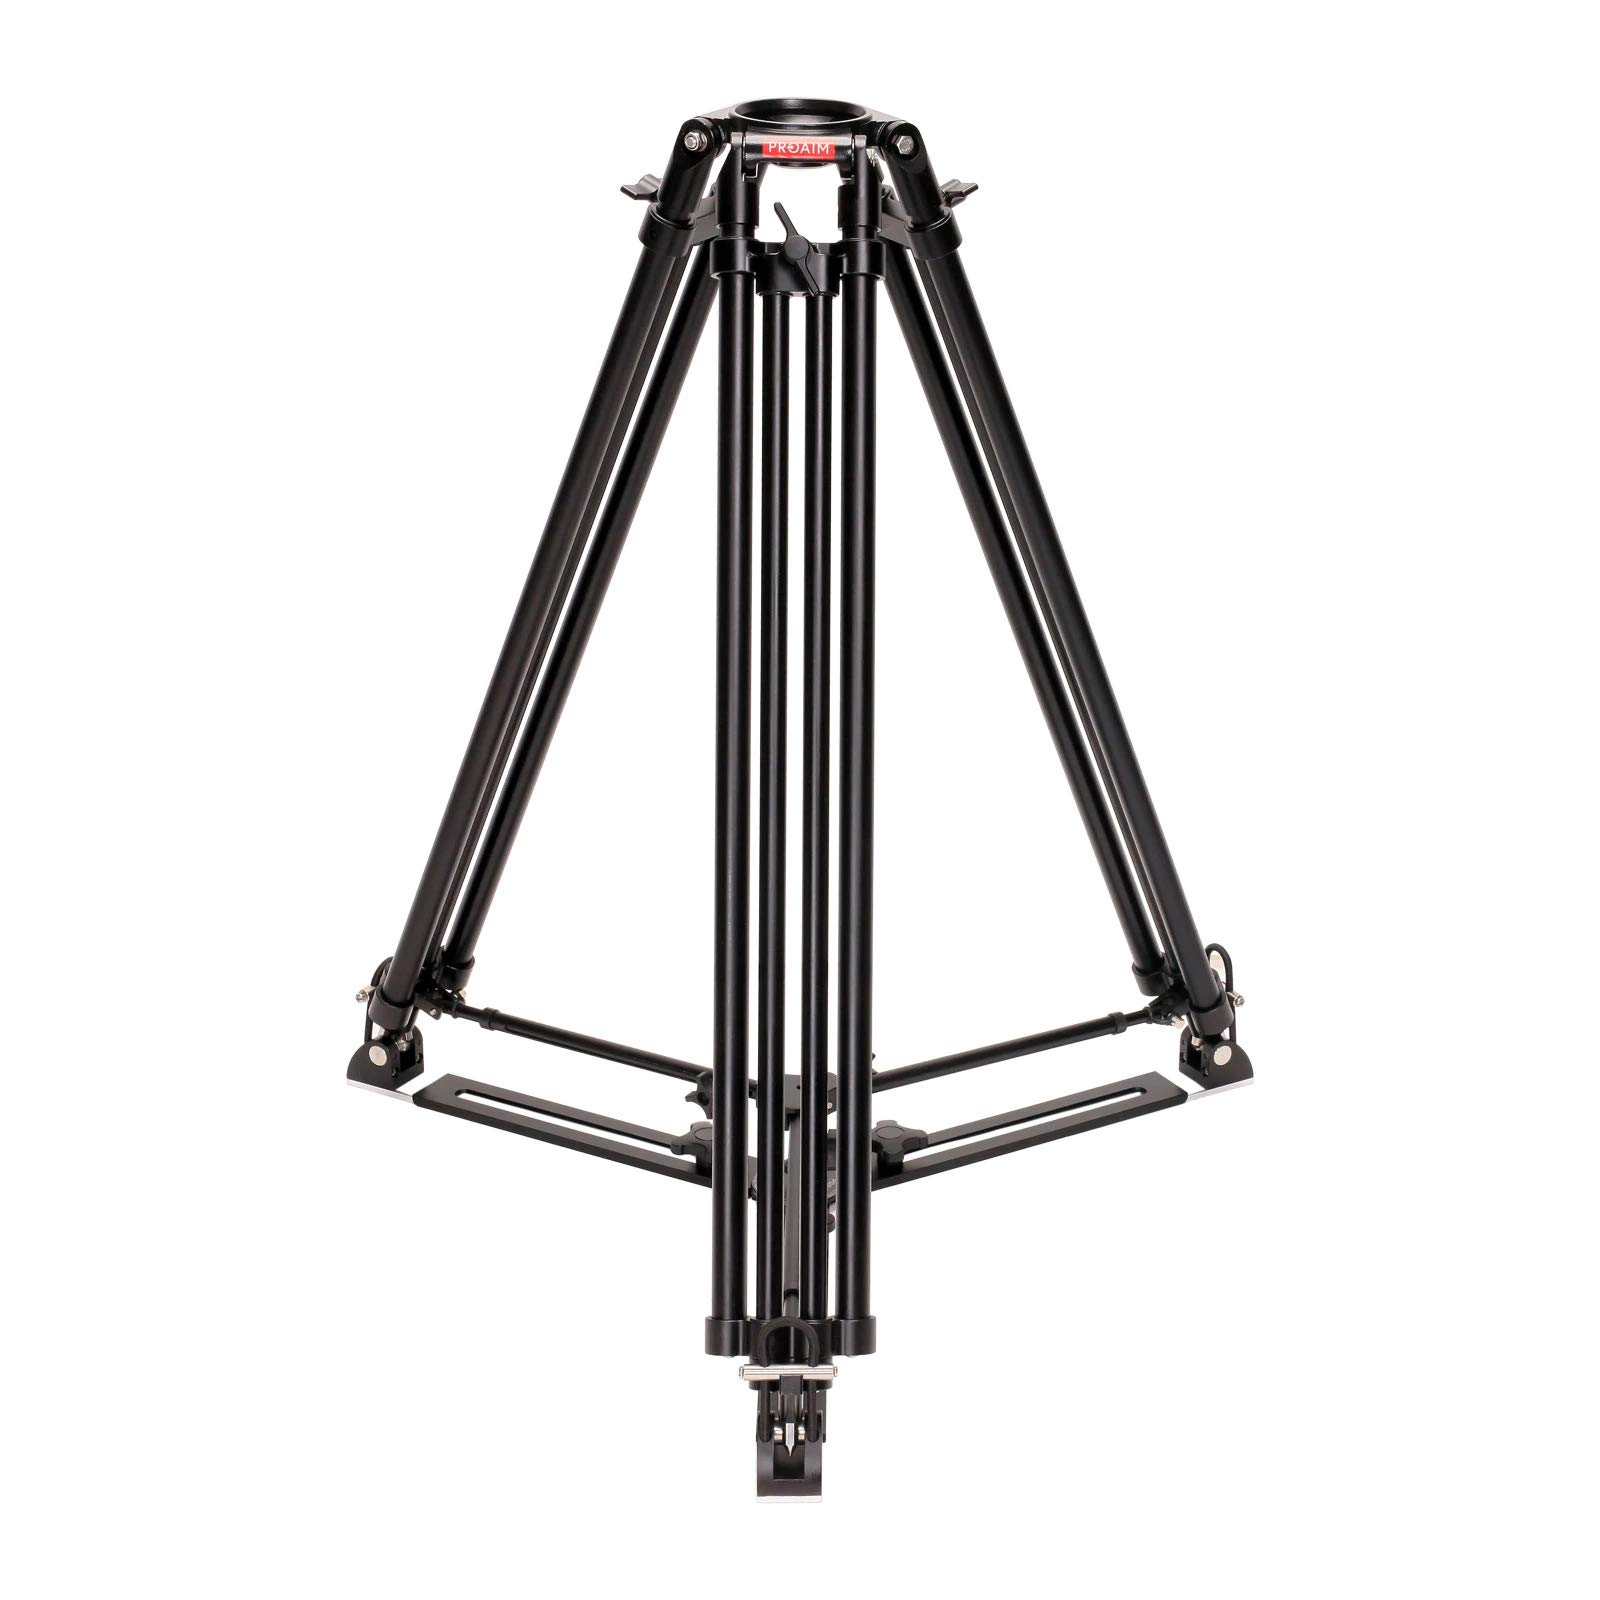 Proaim 100mm Camera Tripod Stand with Aluminum Spreader. Payload of up to 80kg / 176lb. (CST-100-01)